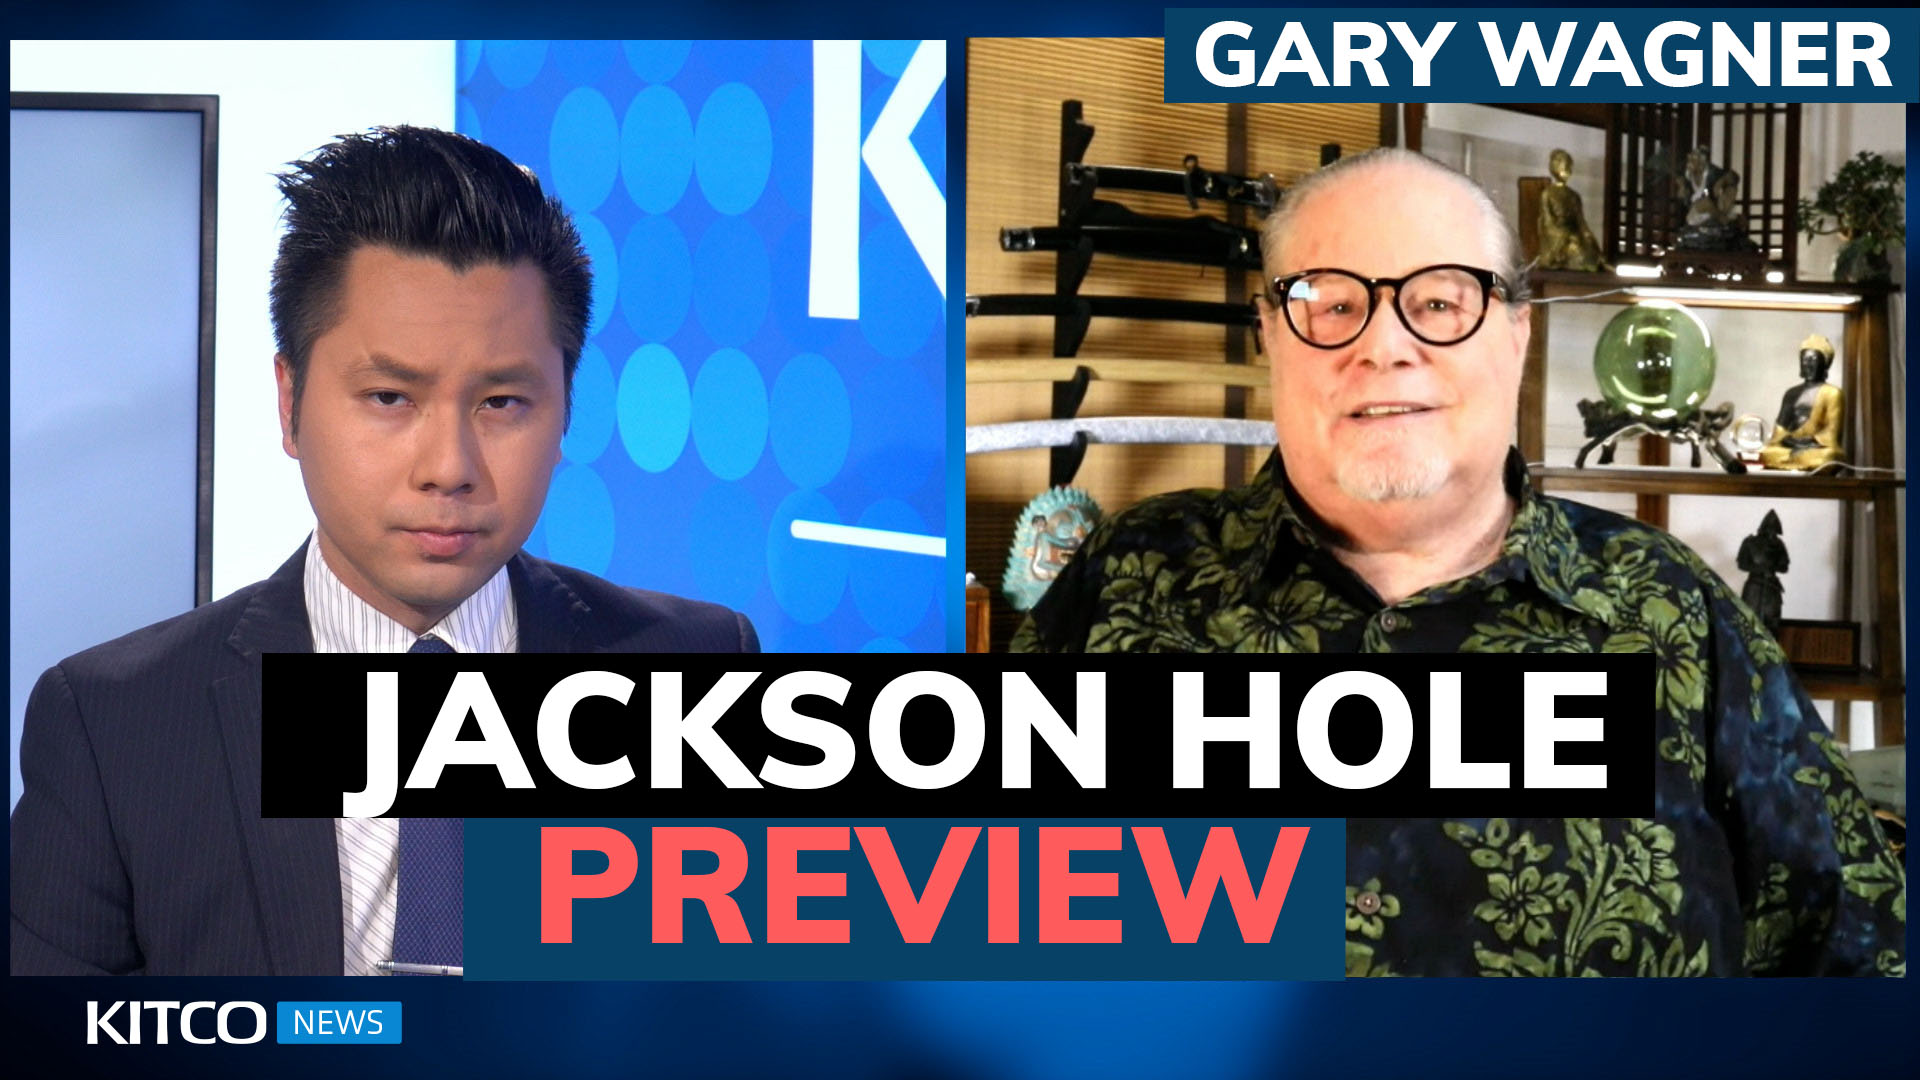 Jackson Hole predictions: Big turning point for markets, bad news for gold? Gary Wagner